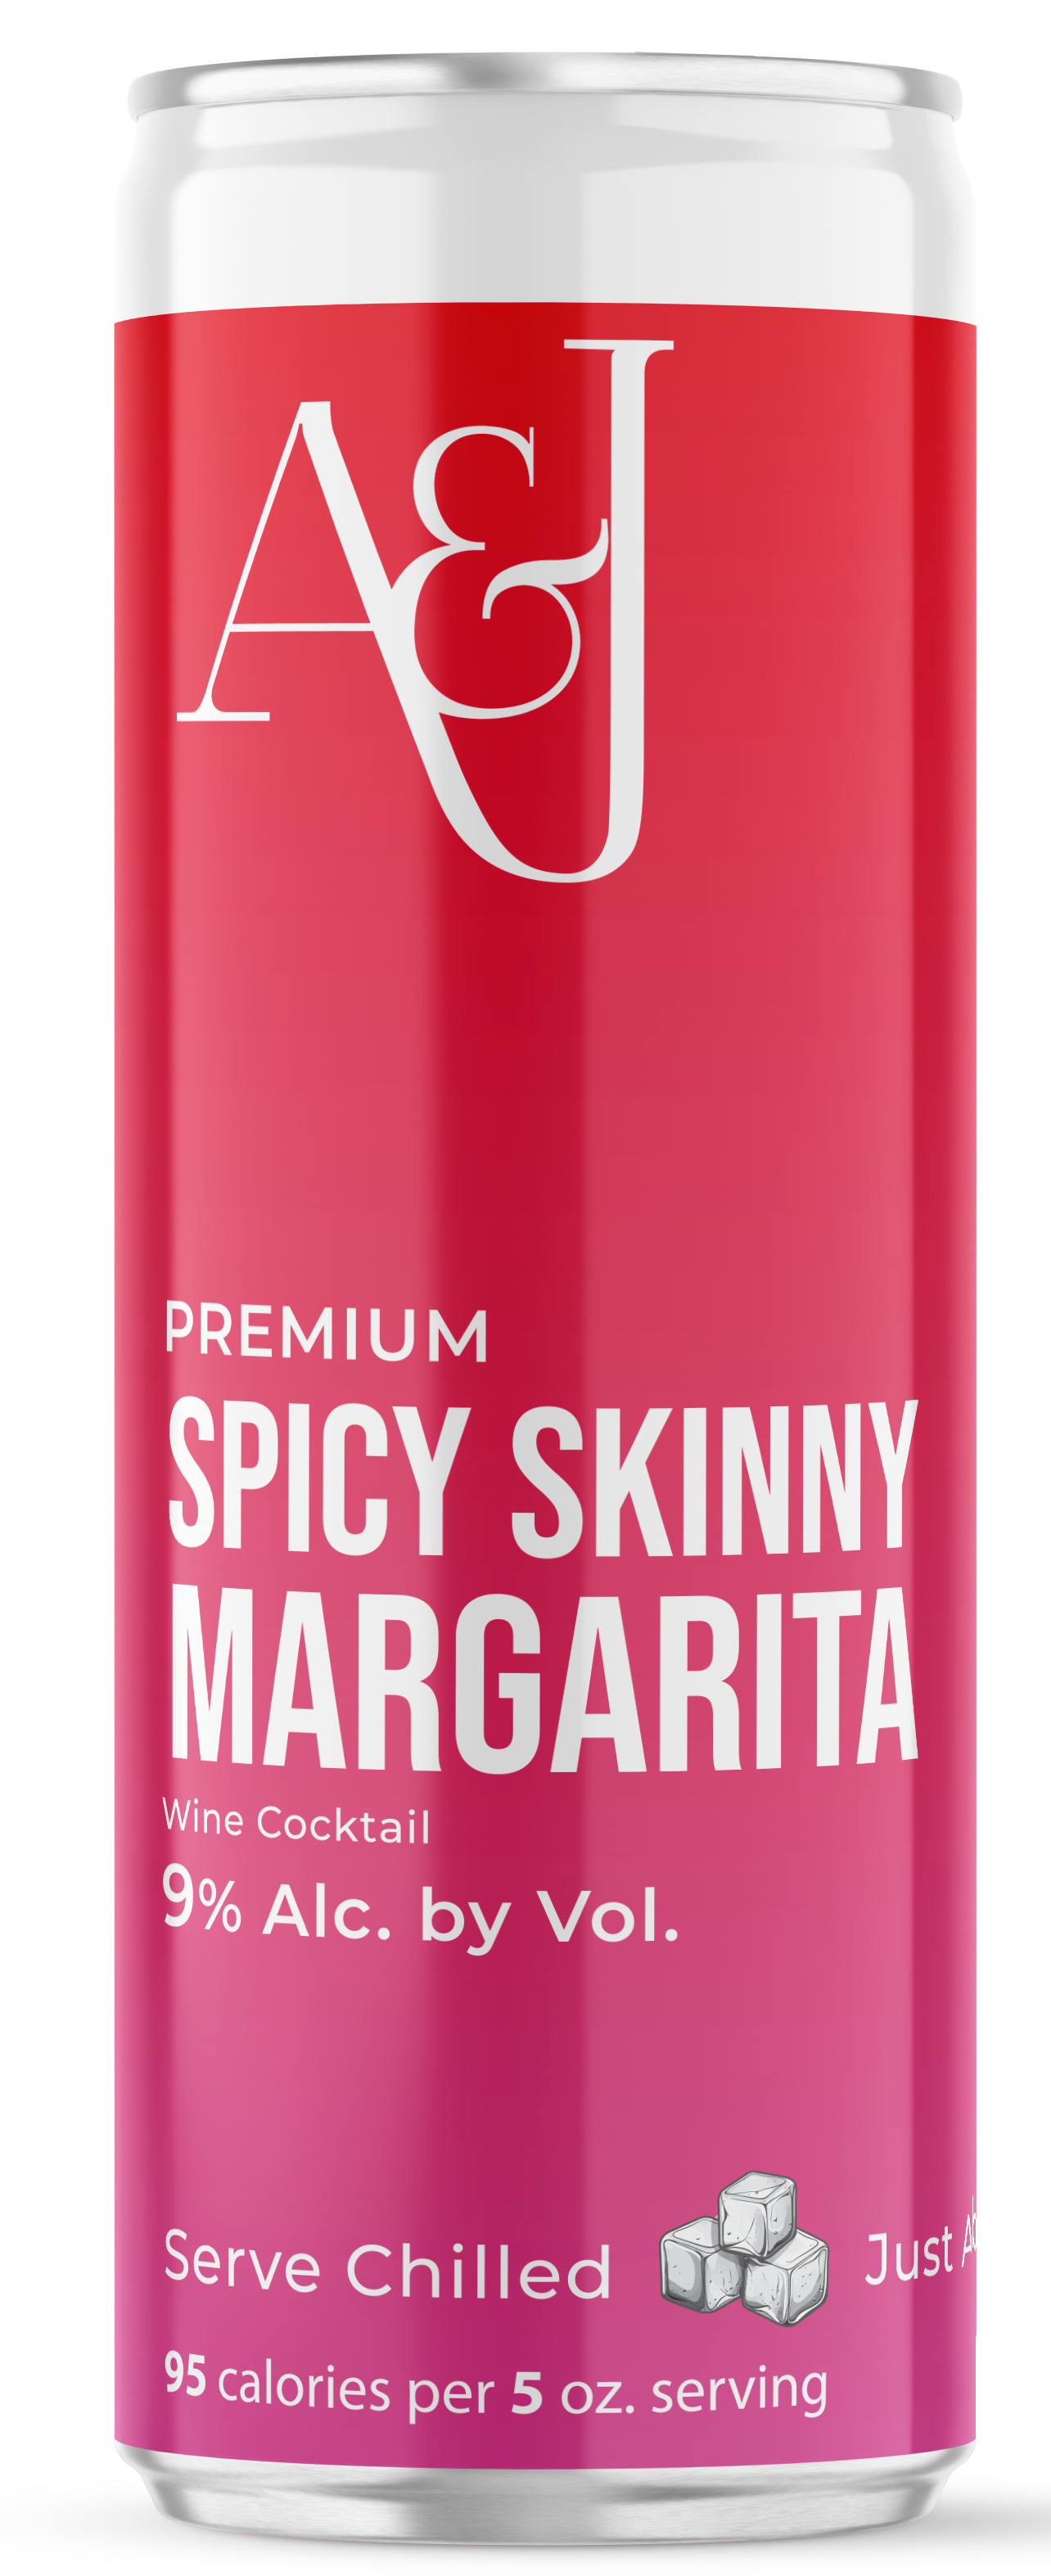 Product Image for SPICY SKINNY MARGARITA WINE COCKTAIL